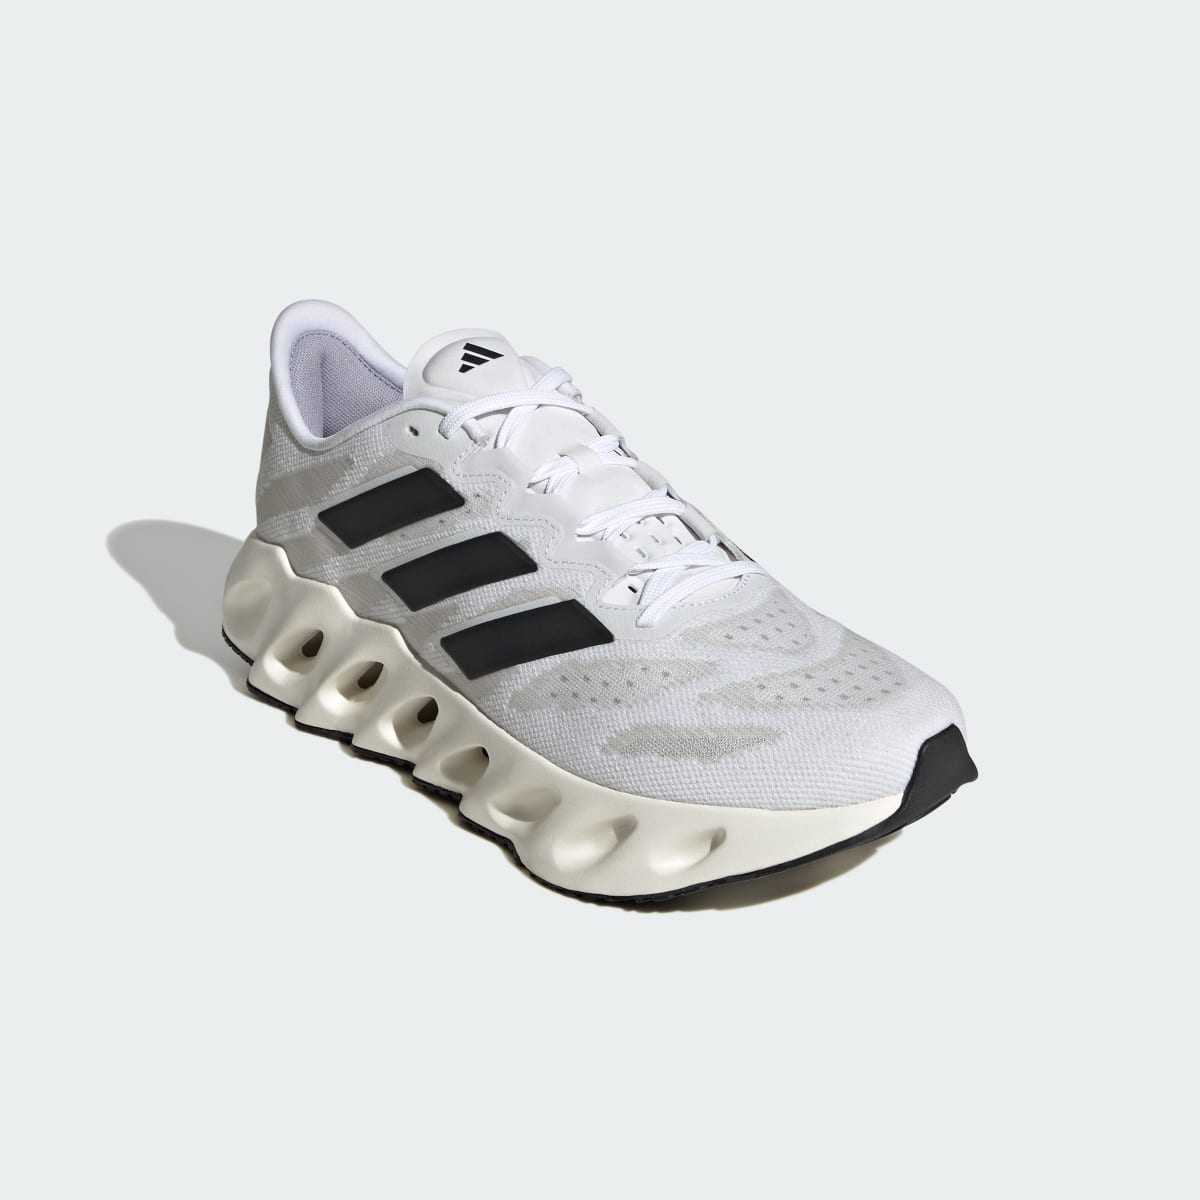 Adidas Switch FWD Running Shoes. 5